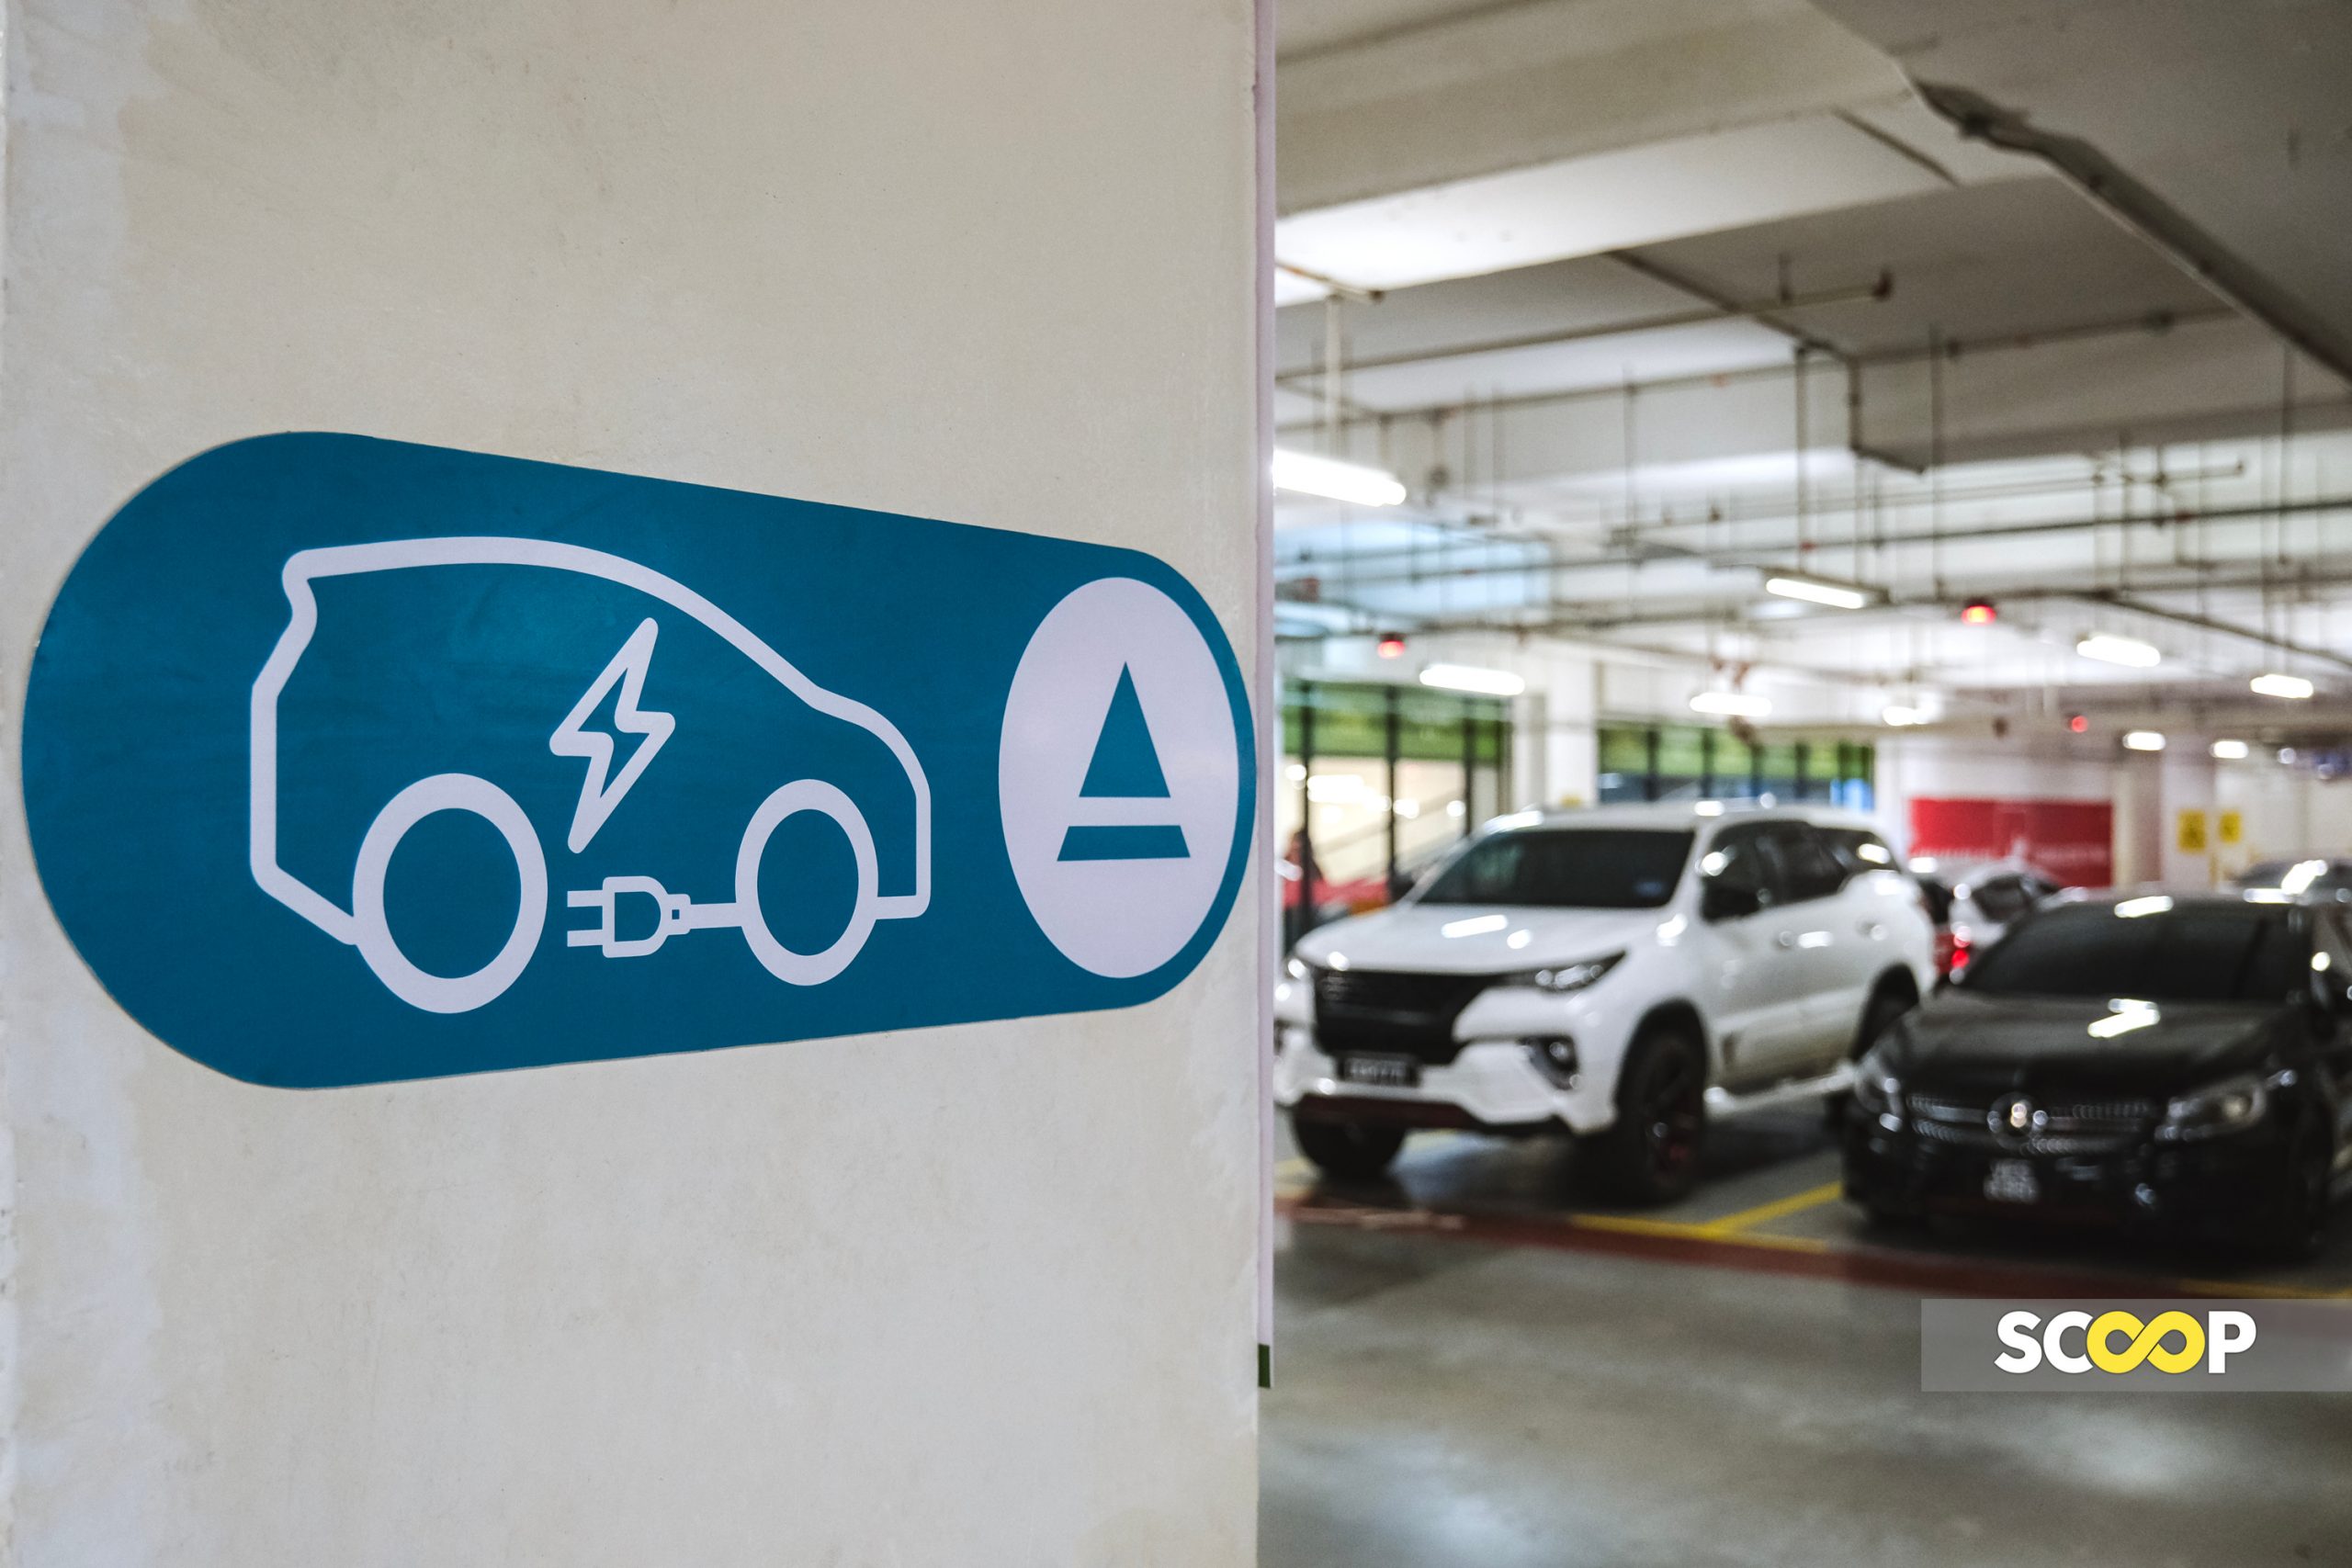 Miti will review target of 10,000 EV charging stations by 2025: Tengku Zafrul